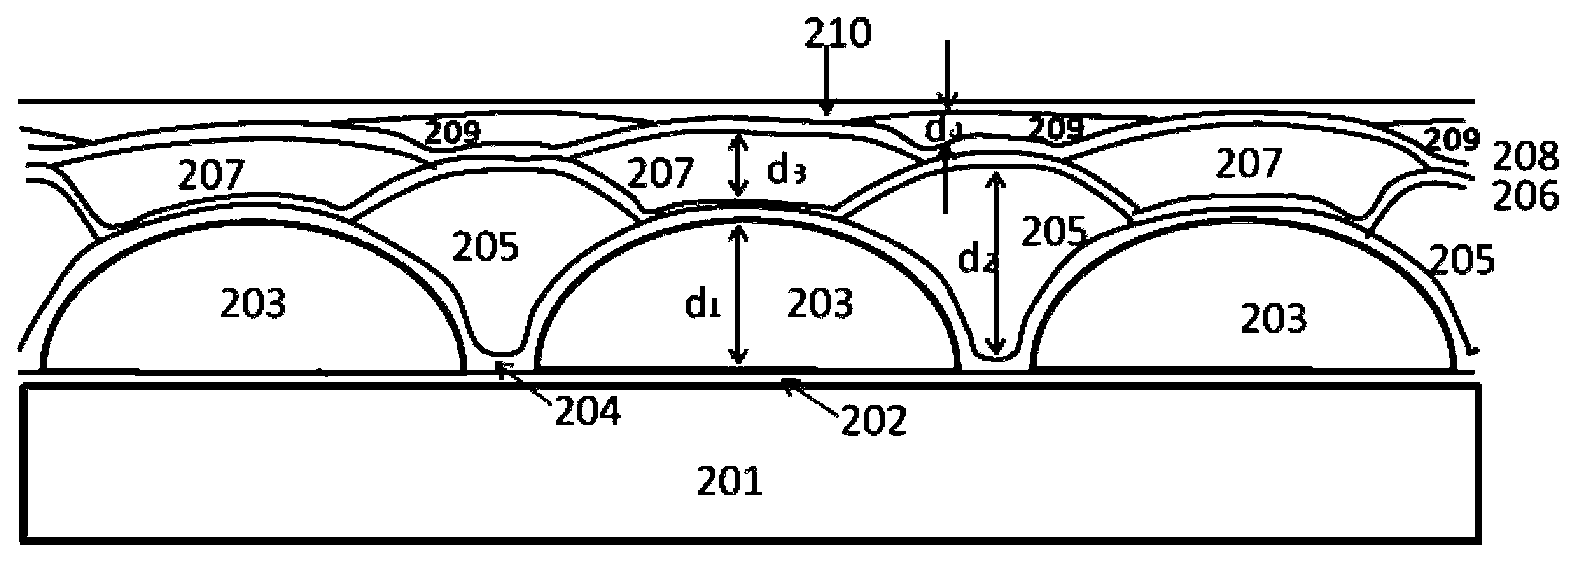 Flexible substrate